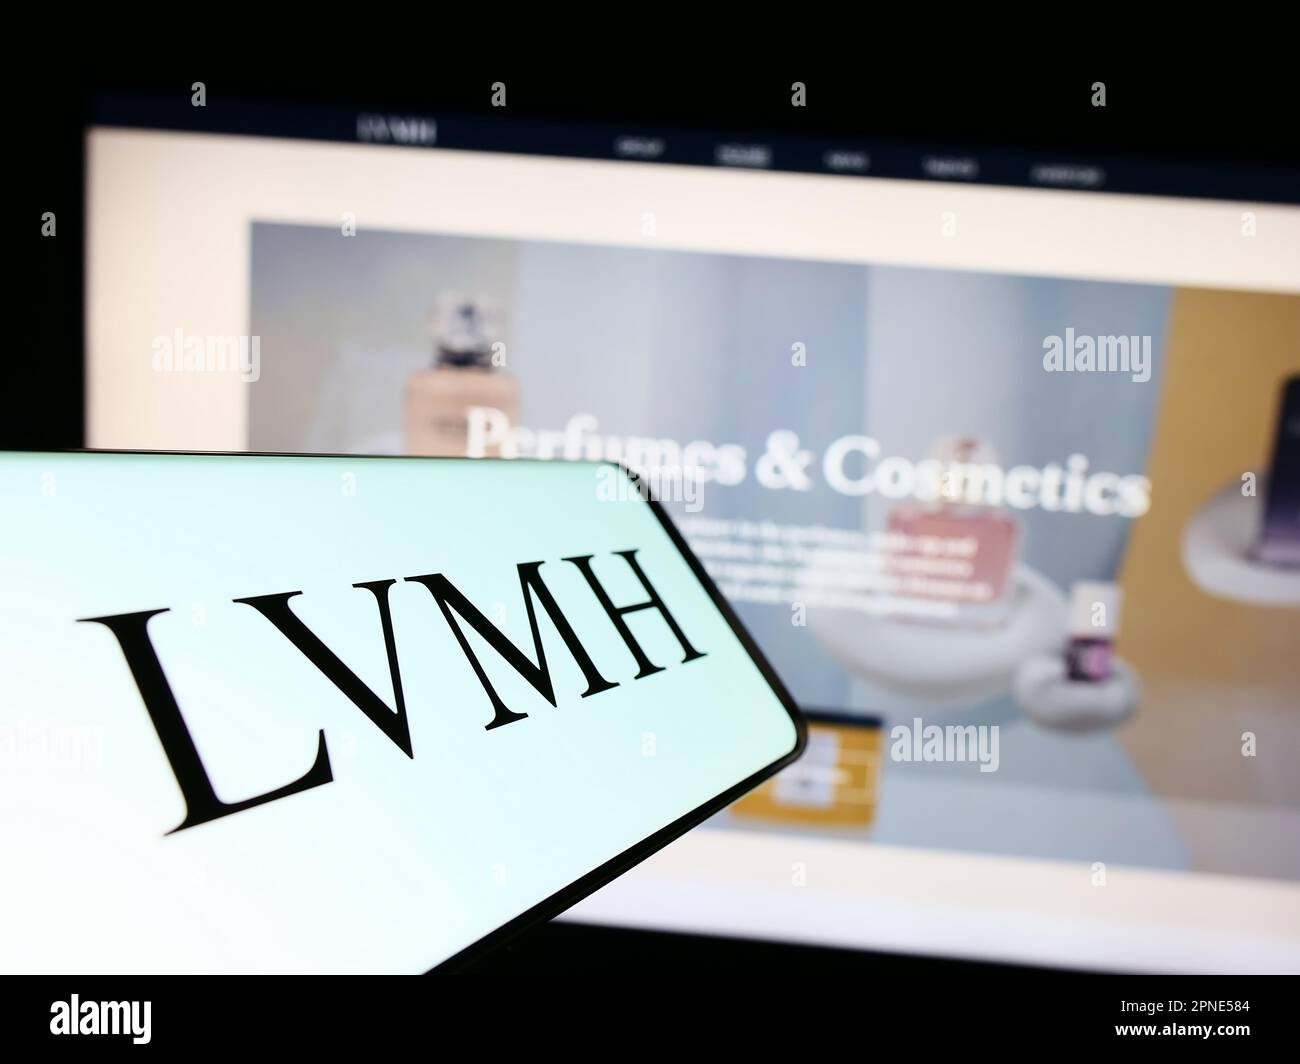 Mobile phone with logo of company LVMH Moet Hennessy Louis Vuitton SE on screen in front of business website. Focus on center of phone display. Stock Photo